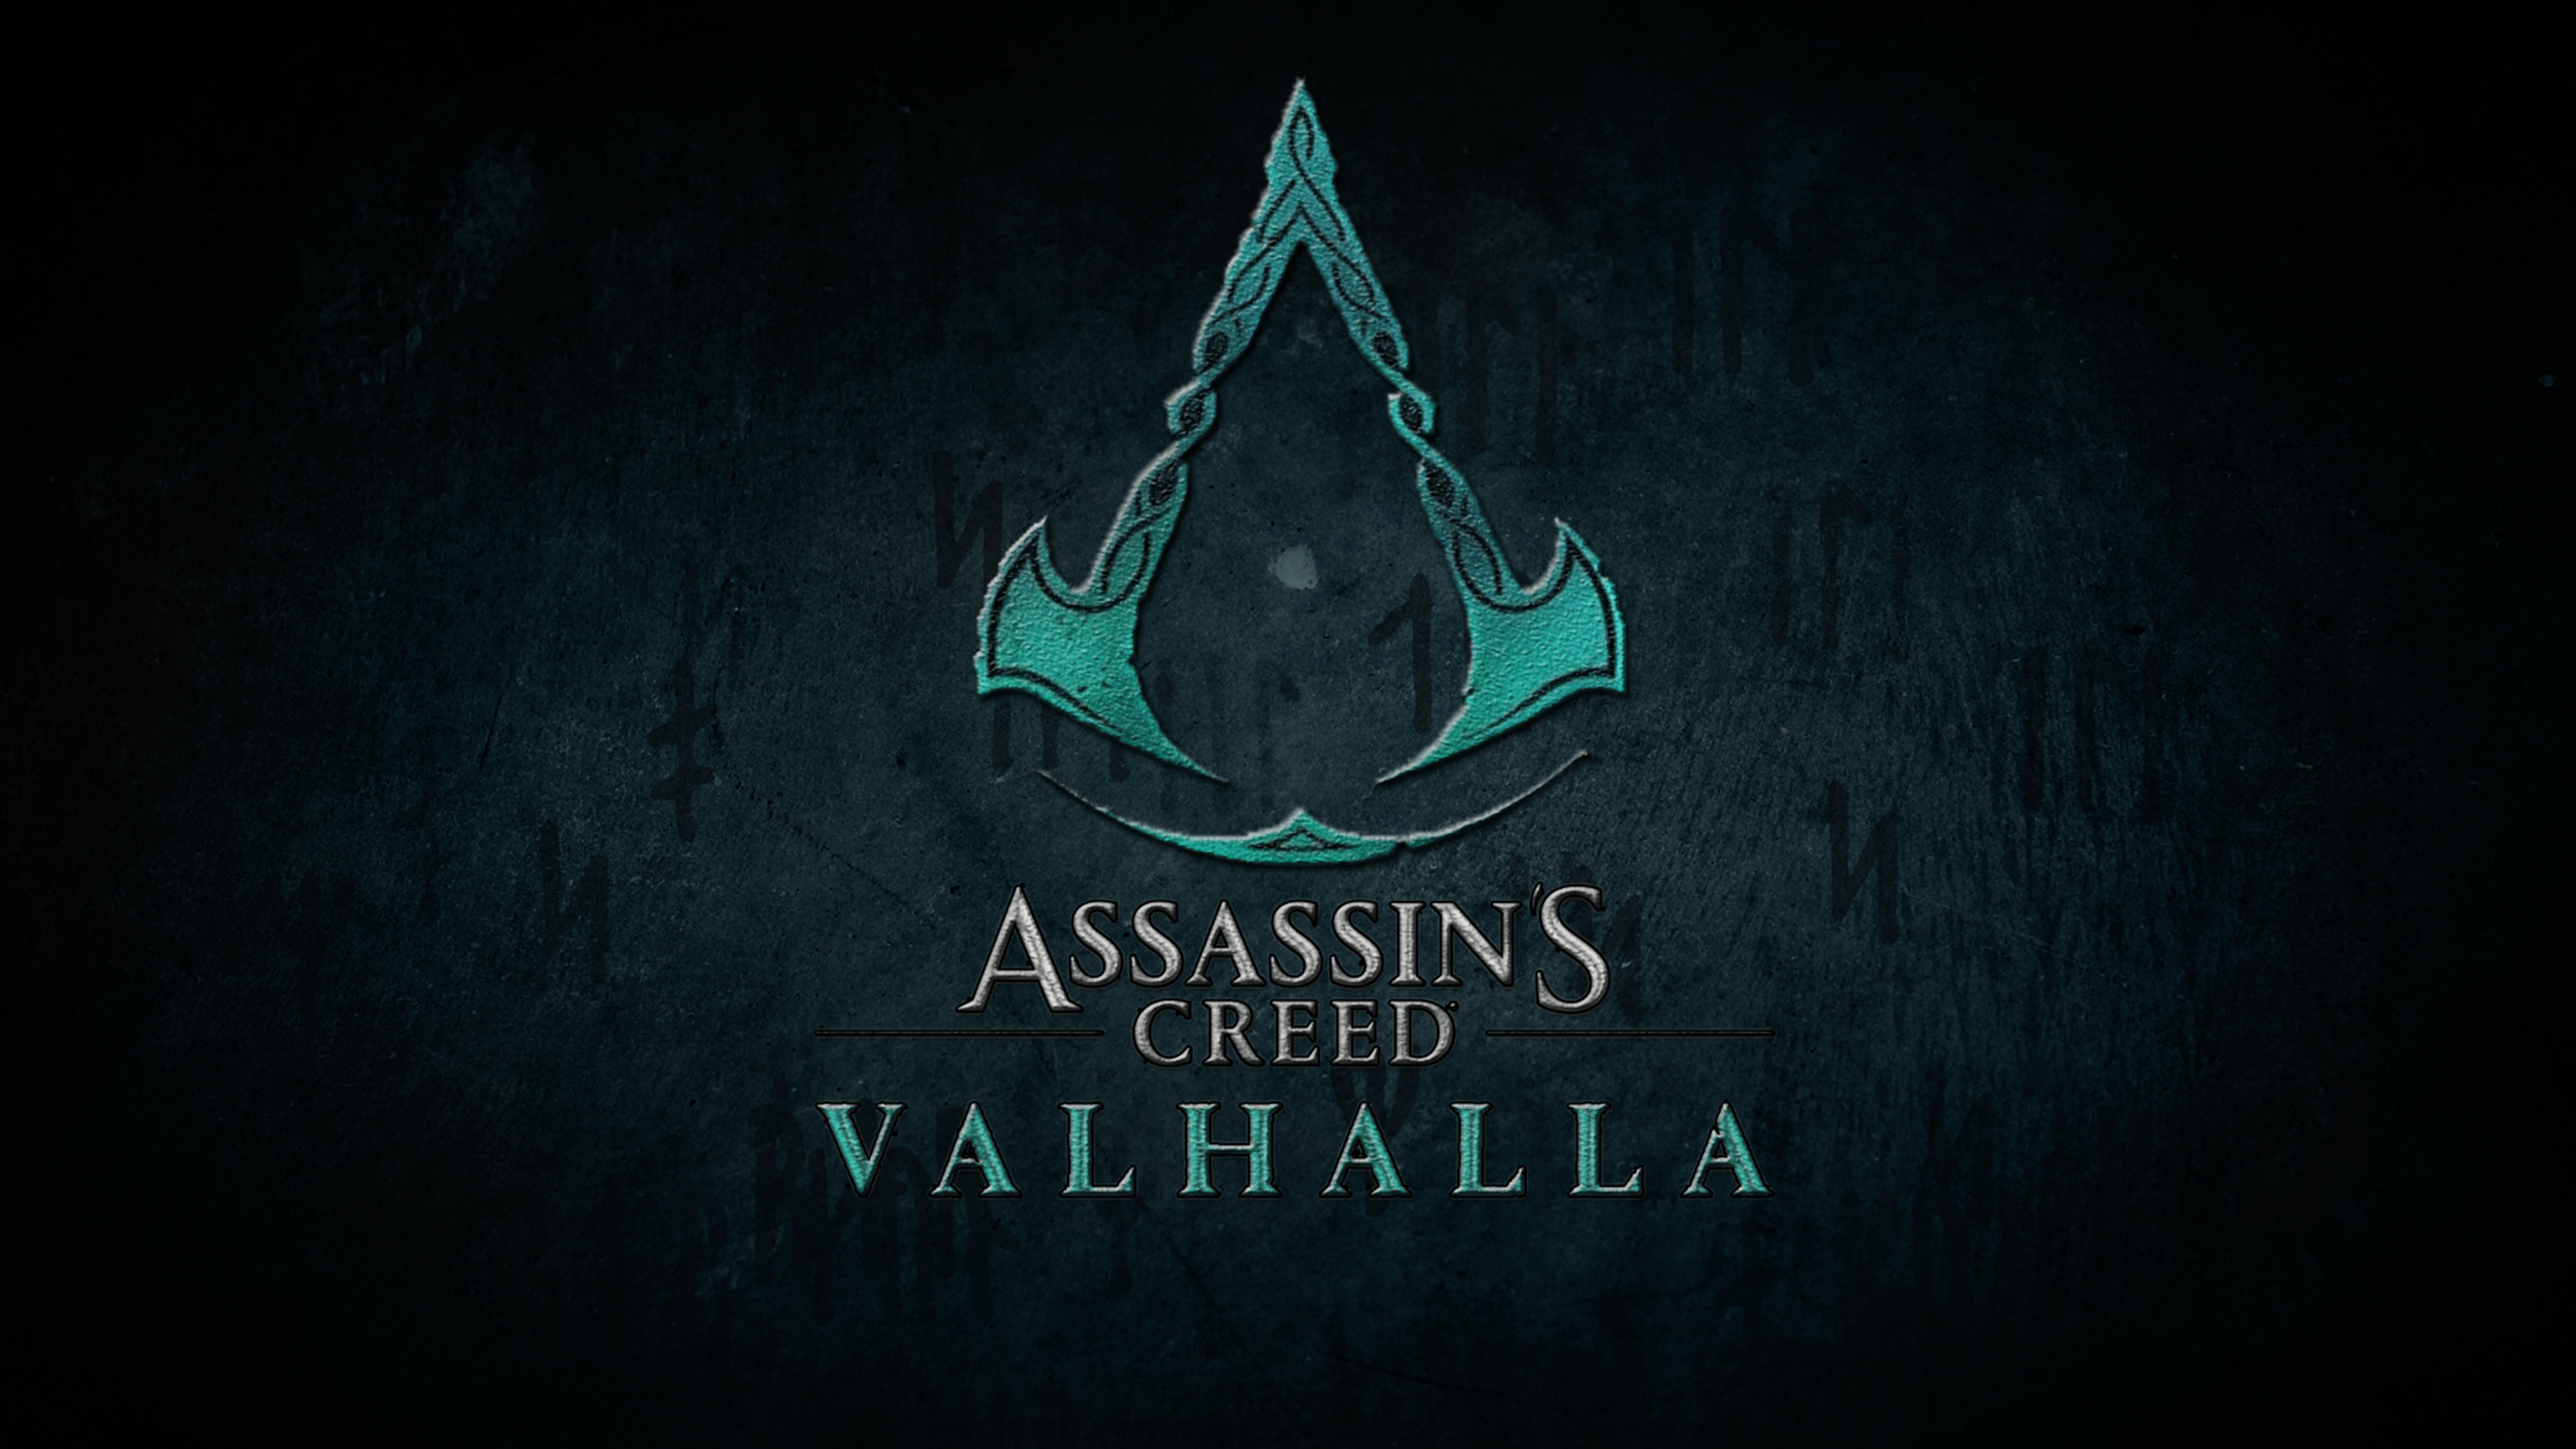 Assassin S Creed Valhalla Wallpapers Top Free Assassin S Creed Valhalla Backgrounds Wallpaperaccess